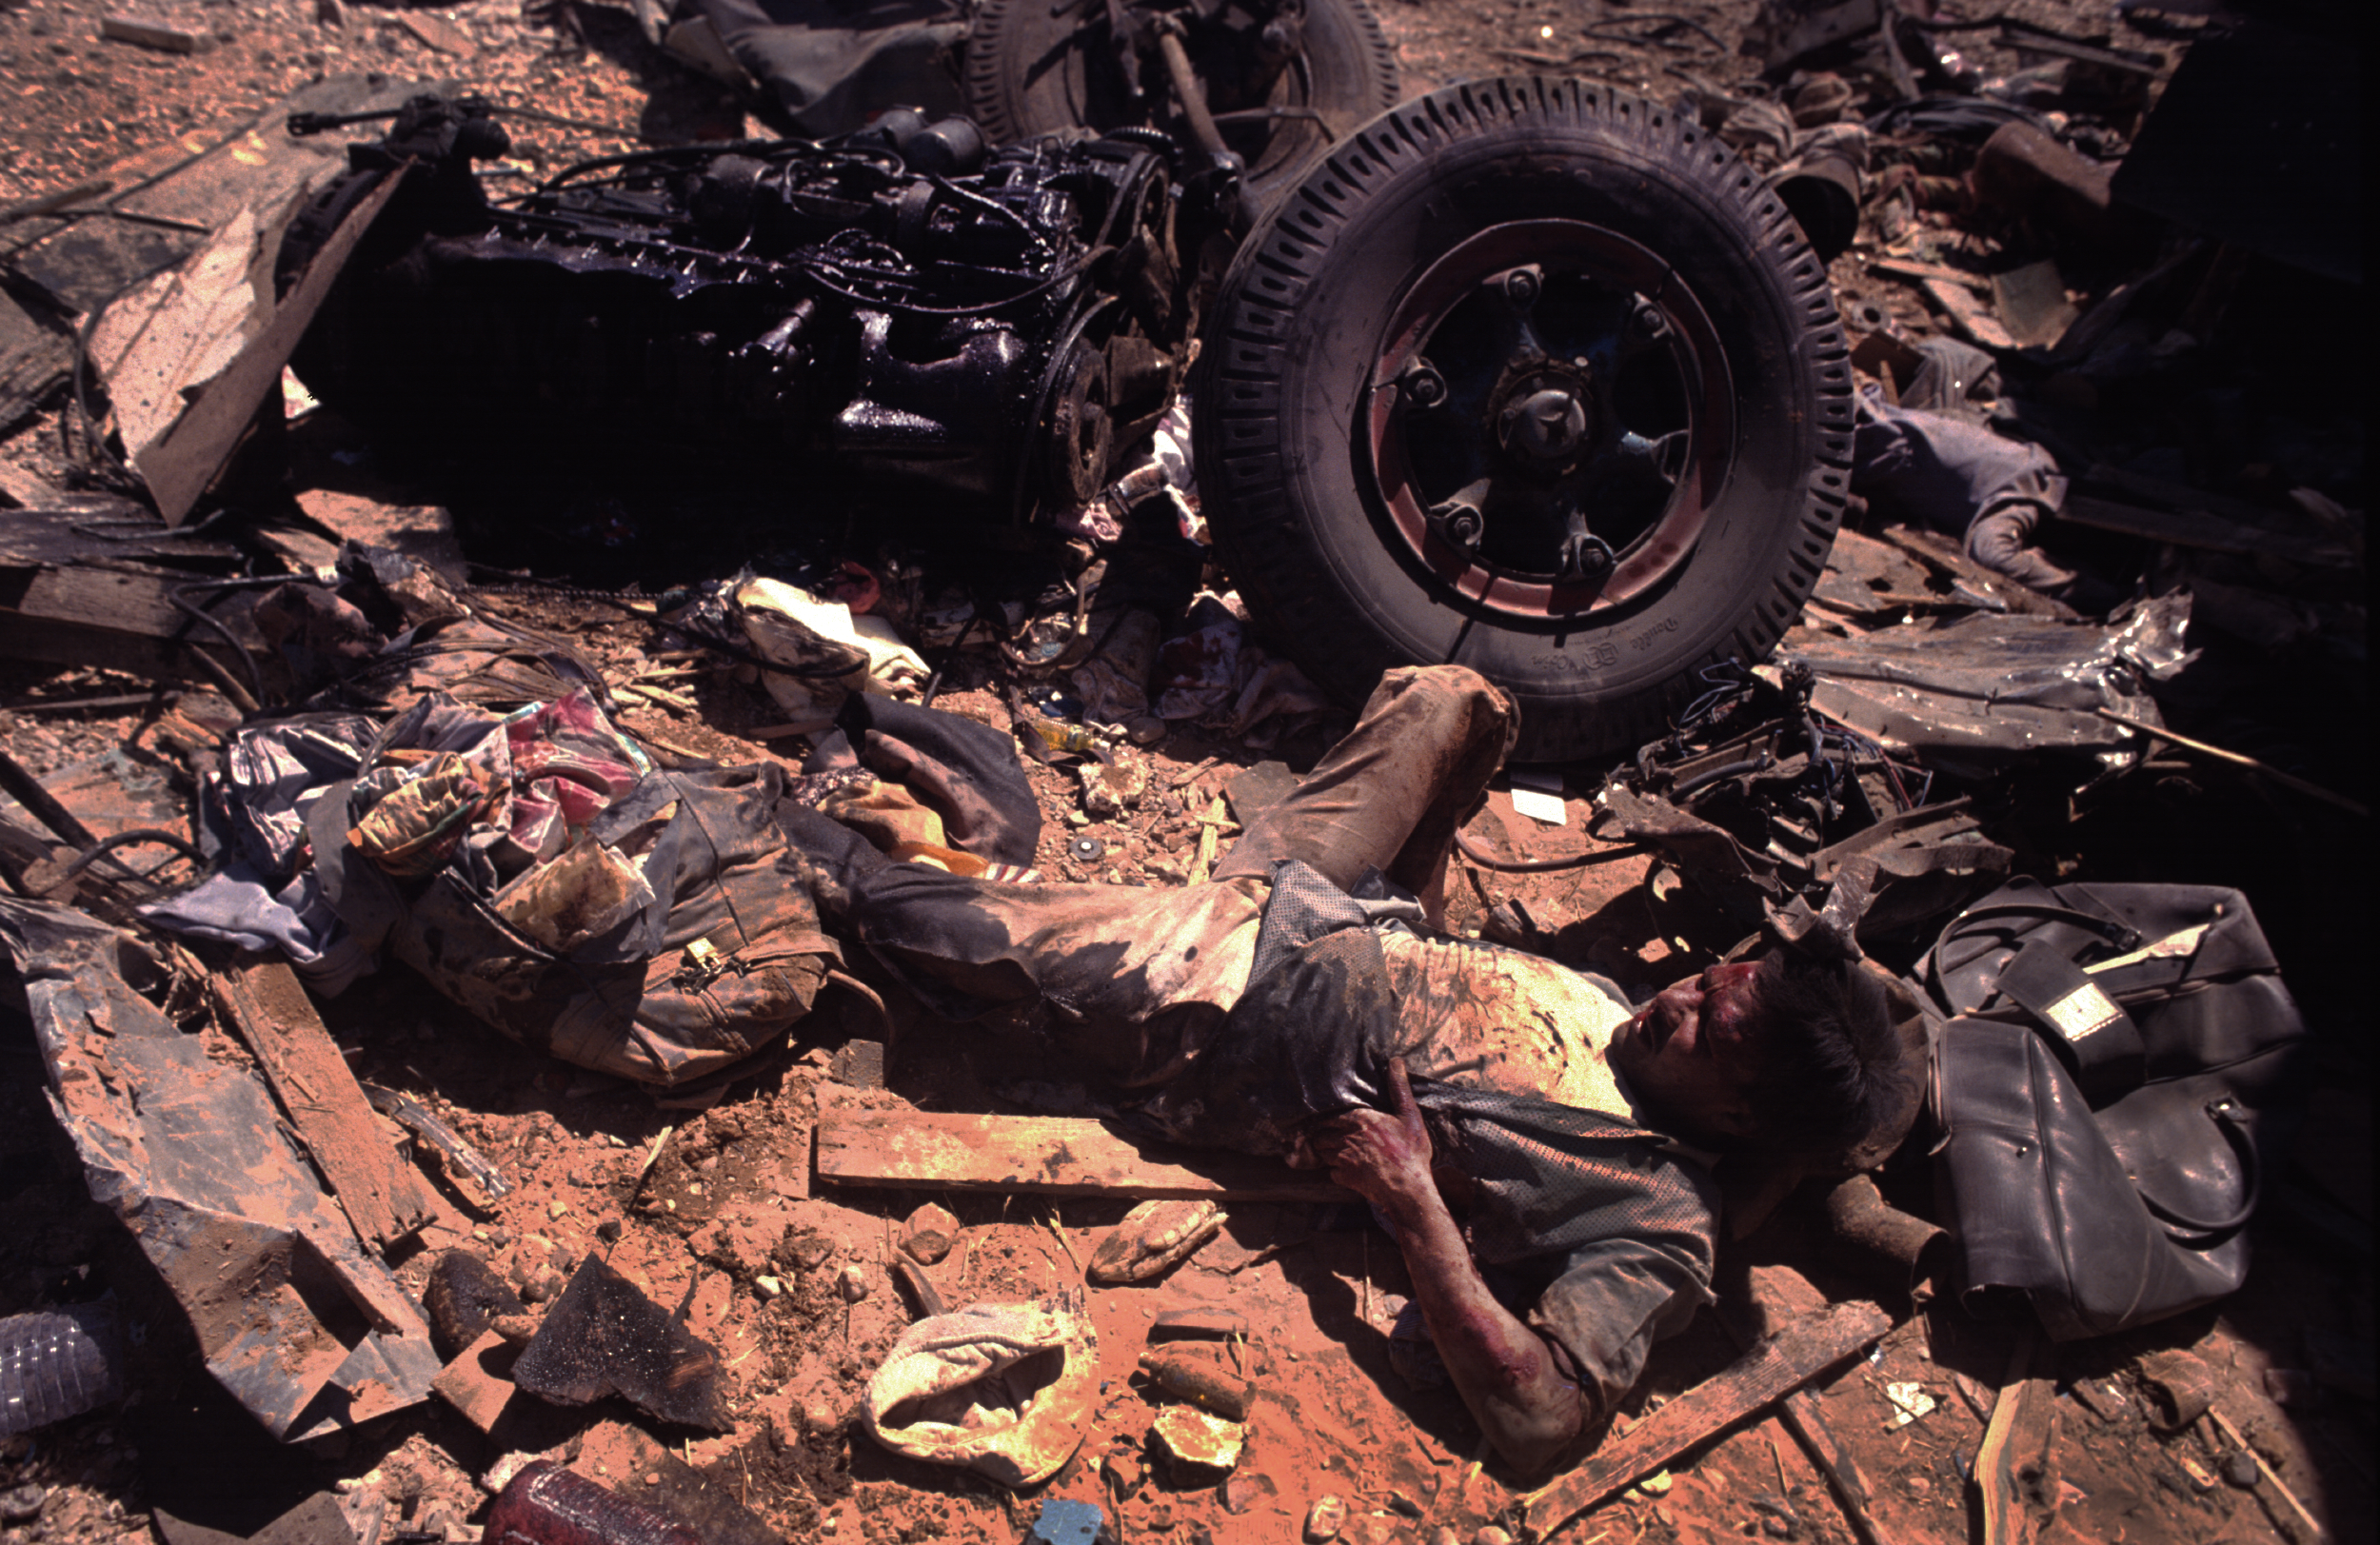  "Fallout of War" On the Baghdad to Basra road during the First Gulf War. 1991 